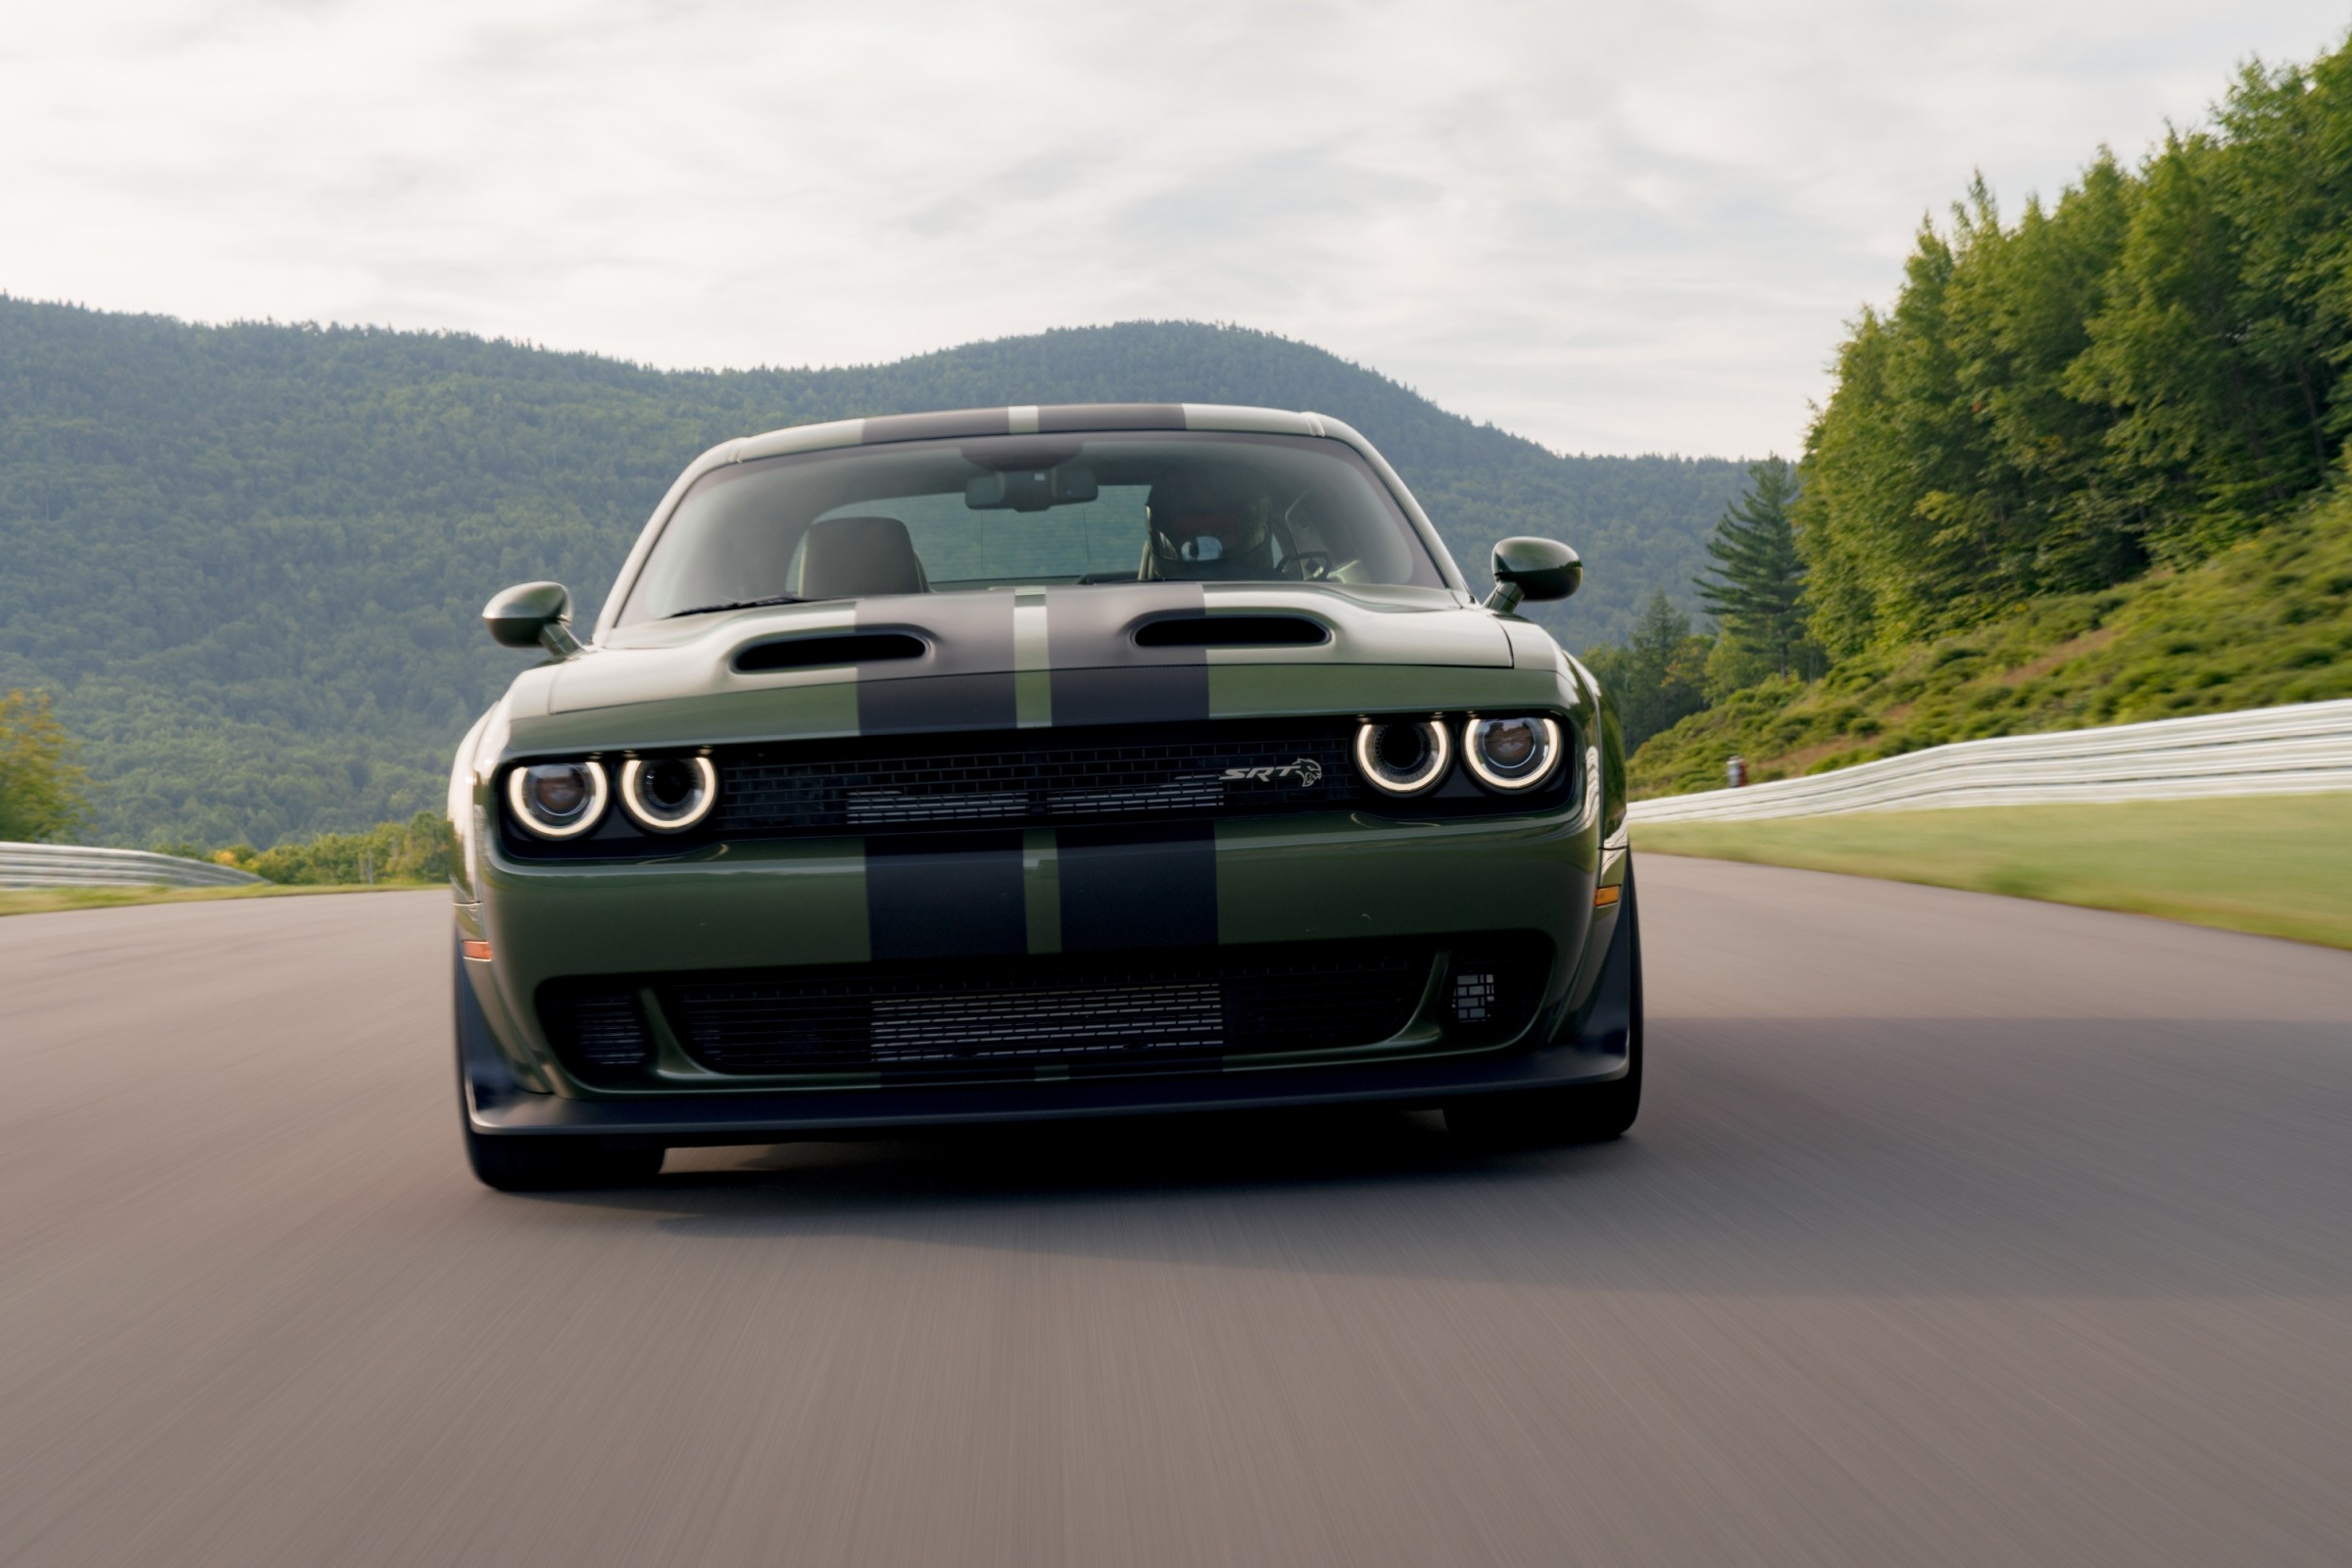 specifications and price of 2021 Dodge Challenger in Nigeria